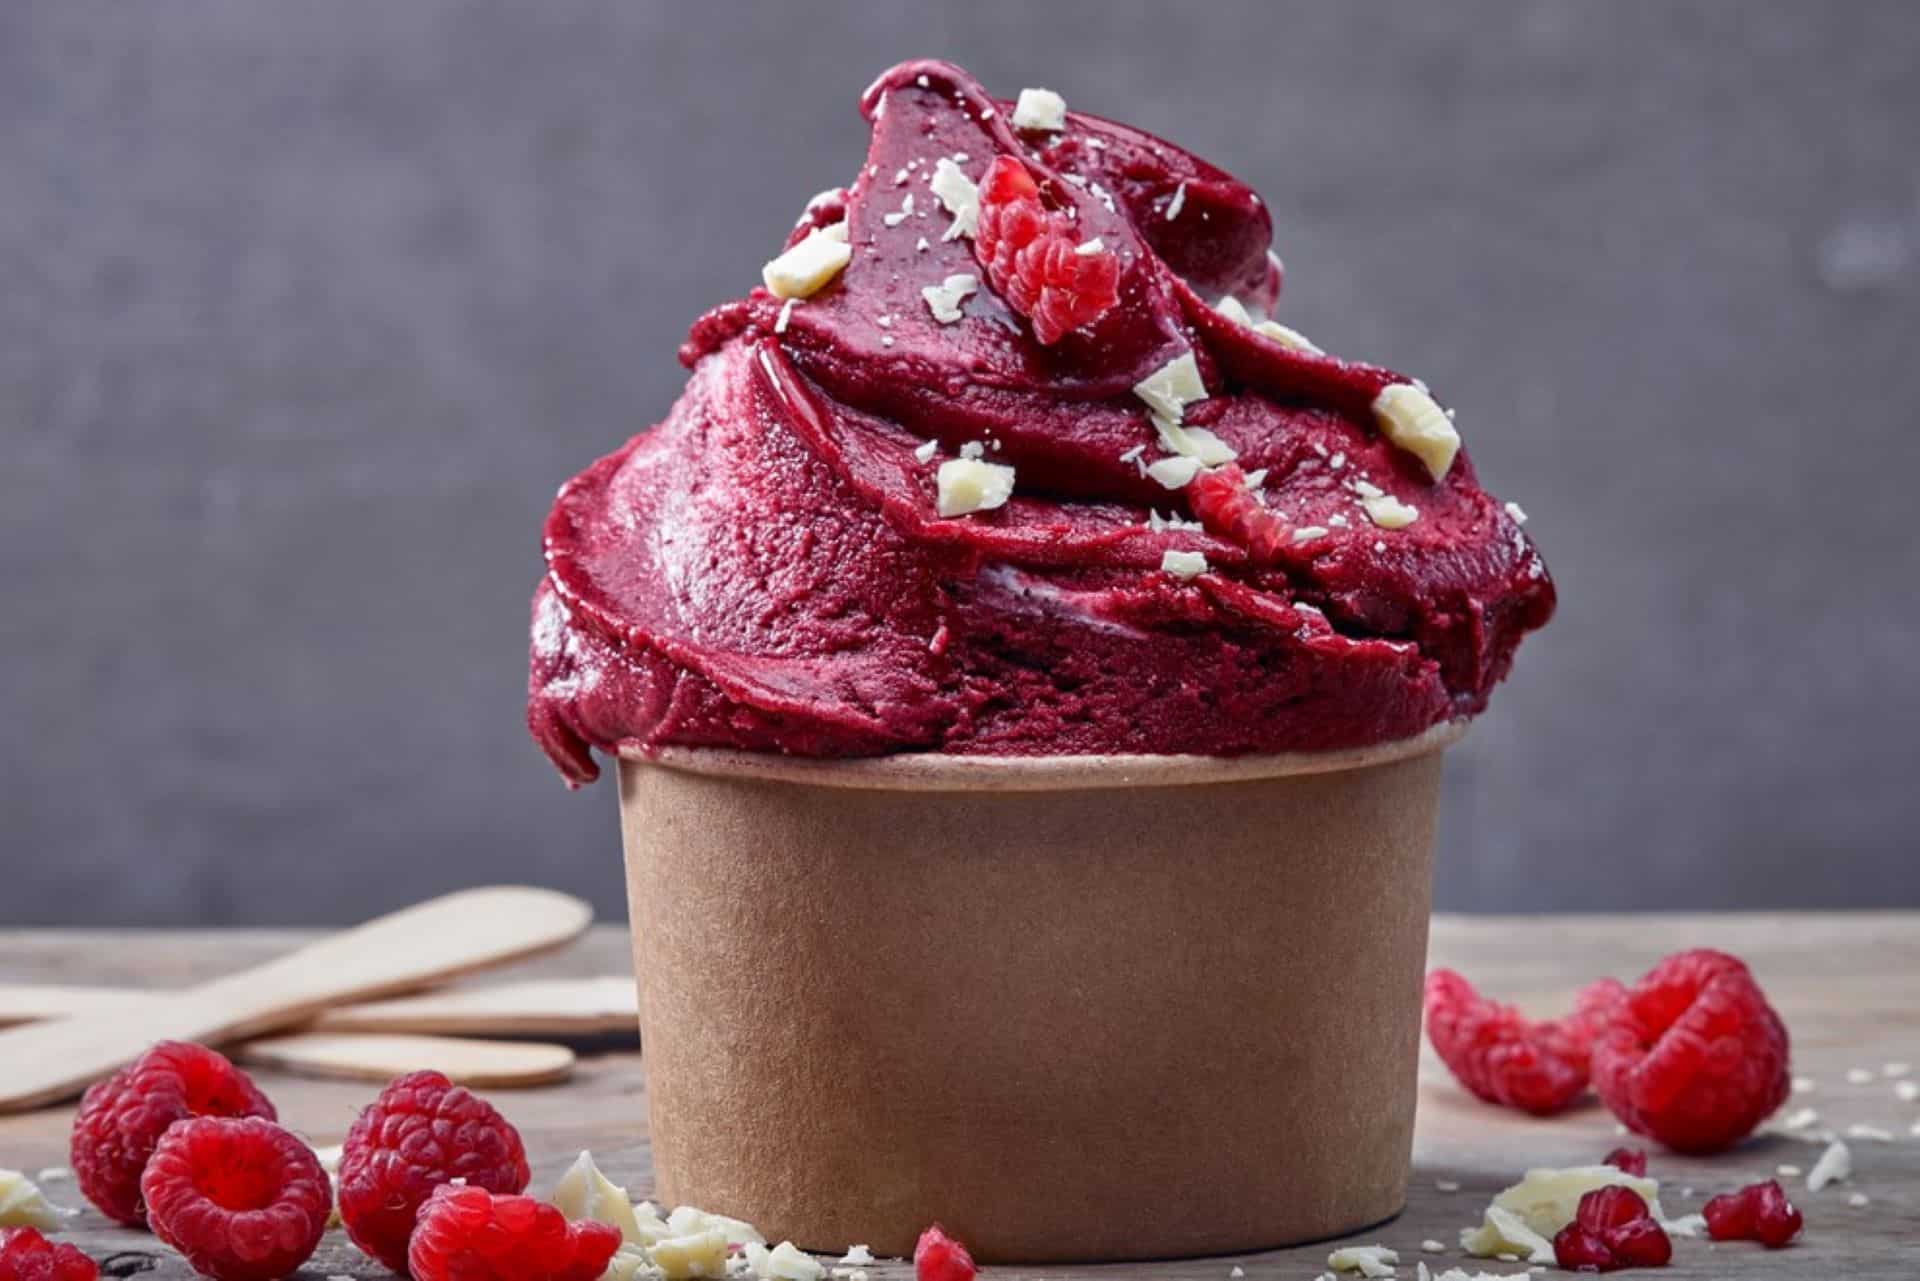 Say “Buh-Bye” To Store-Bought Ice Cream And Try These 11 Homemade Recipes Instead